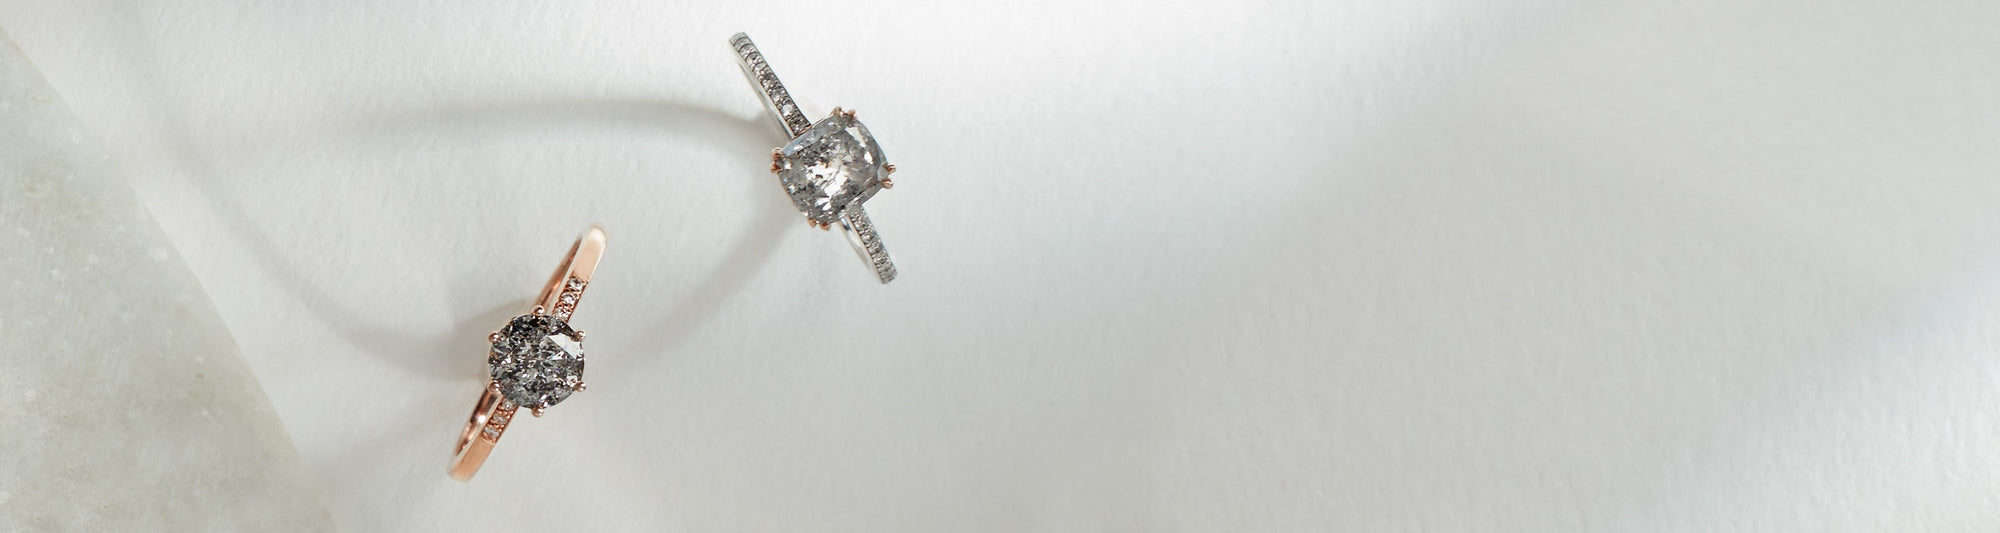 Two solitaire grey diamond engagement rings with white diamond pave on the band on a grey background.